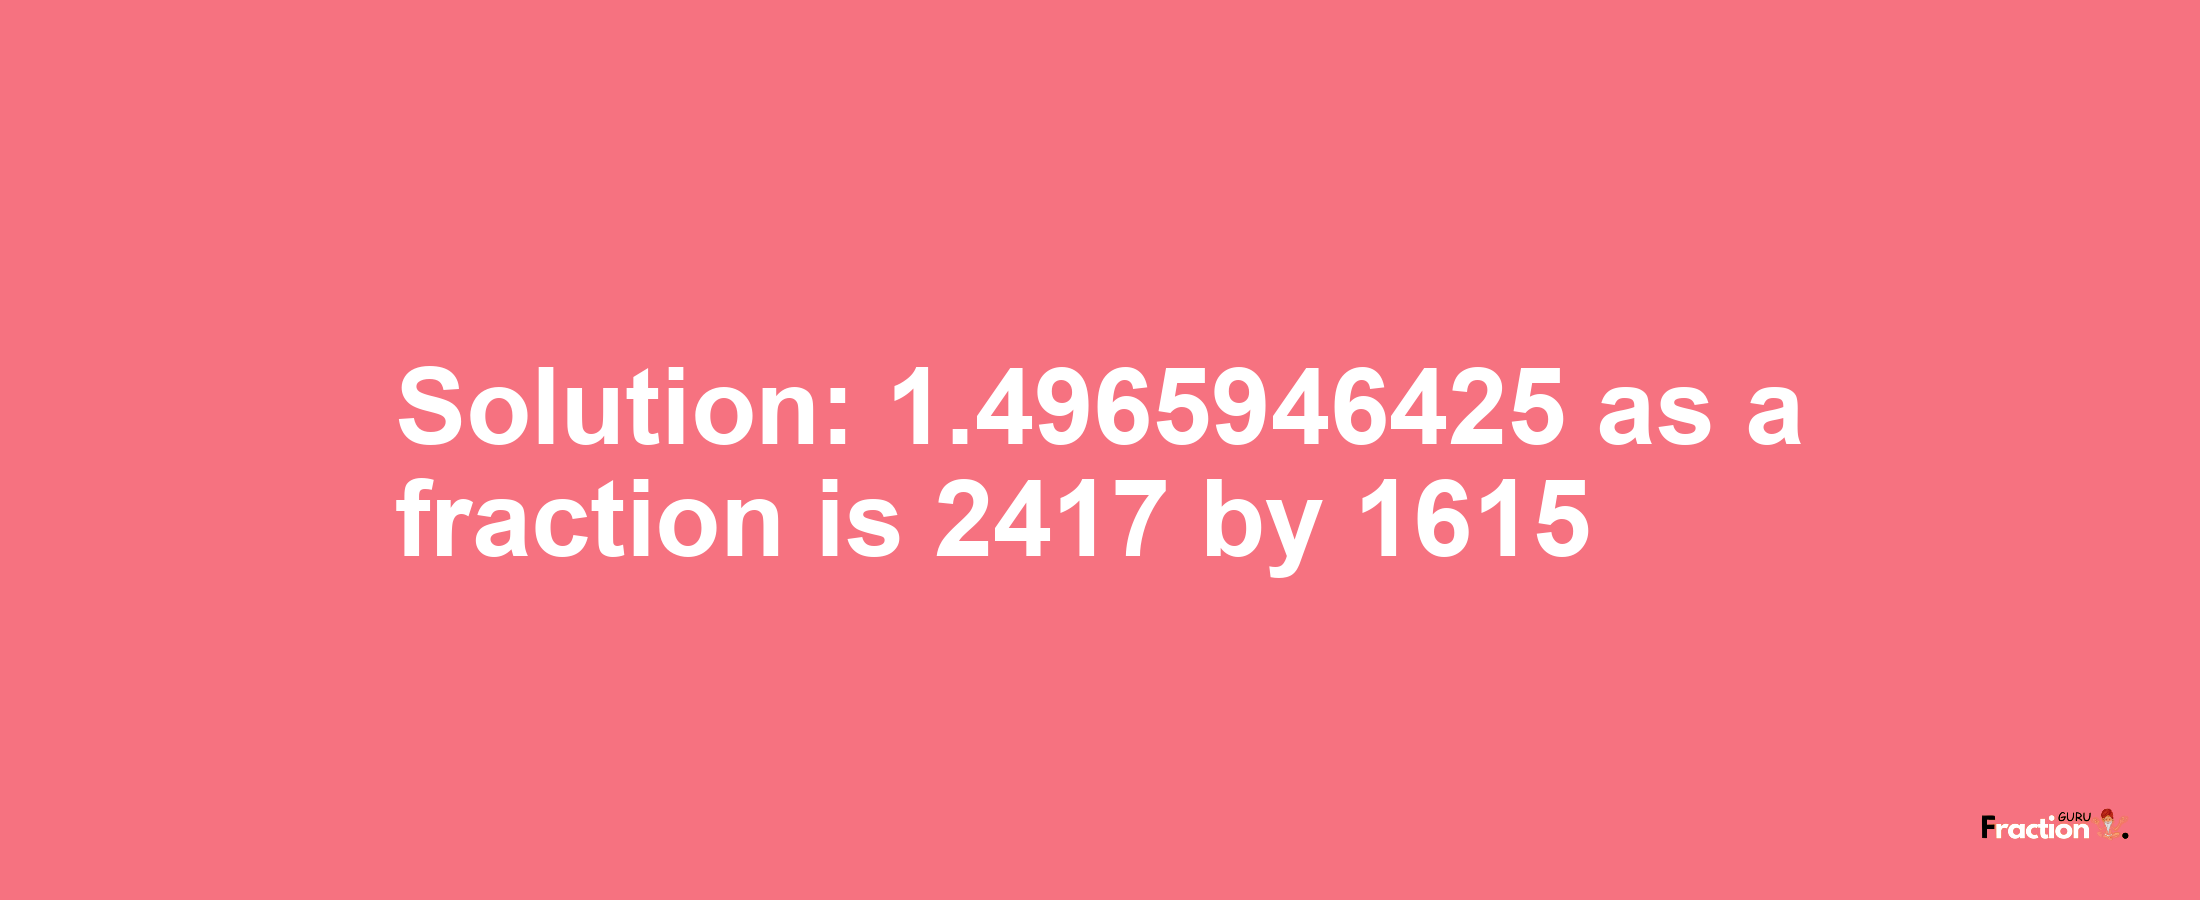 Solution:1.4965946425 as a fraction is 2417/1615